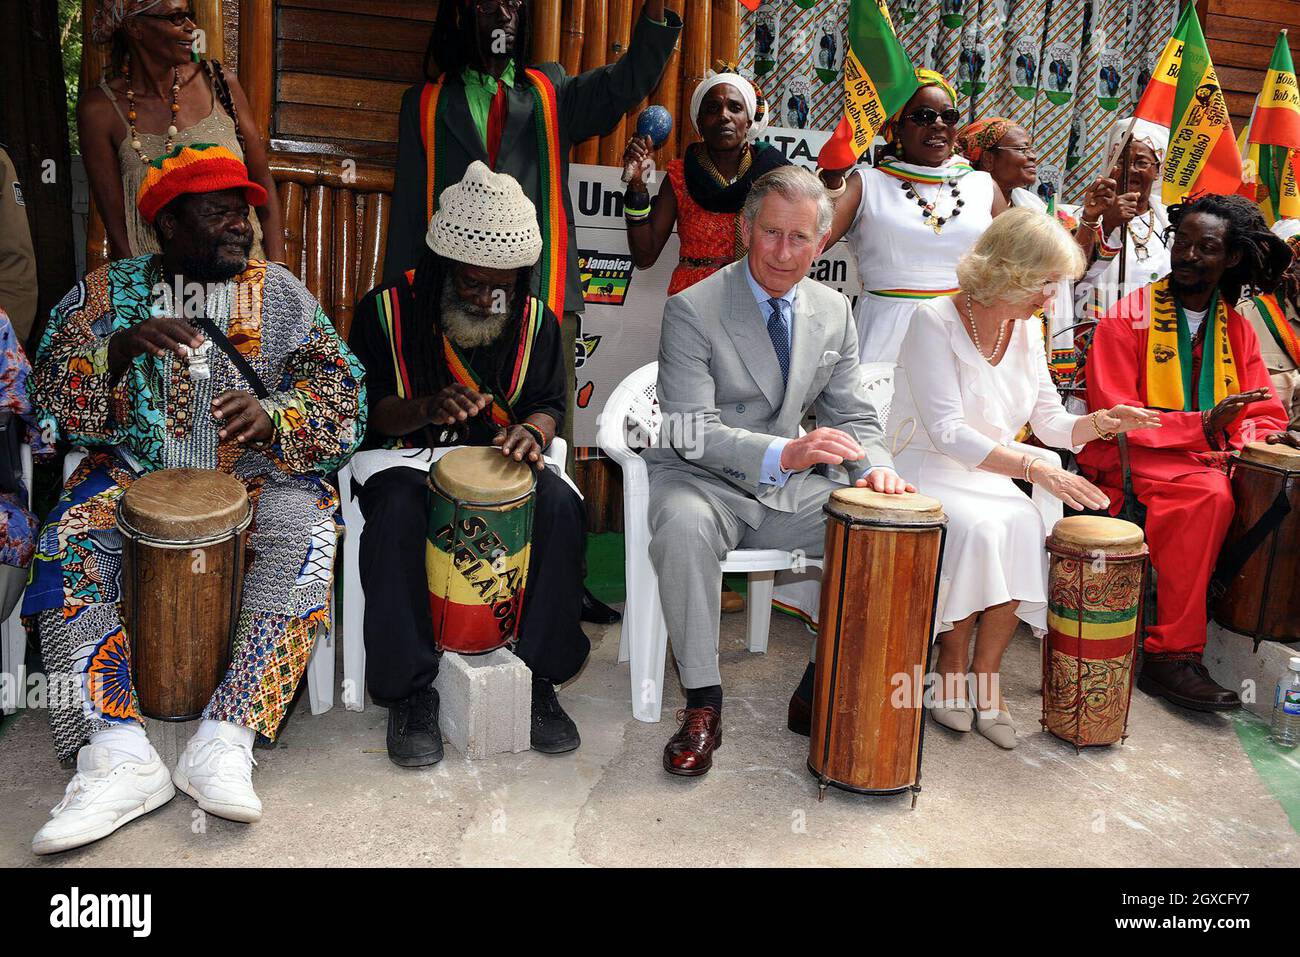 Prince Charles, Prince of Wales and Camilla, Duchess of Cornwall play the bongo drums as they join a group of musicians at the former home, now a museum, of musician Bob Marley in Kingston, Jamaica. Stock Photo